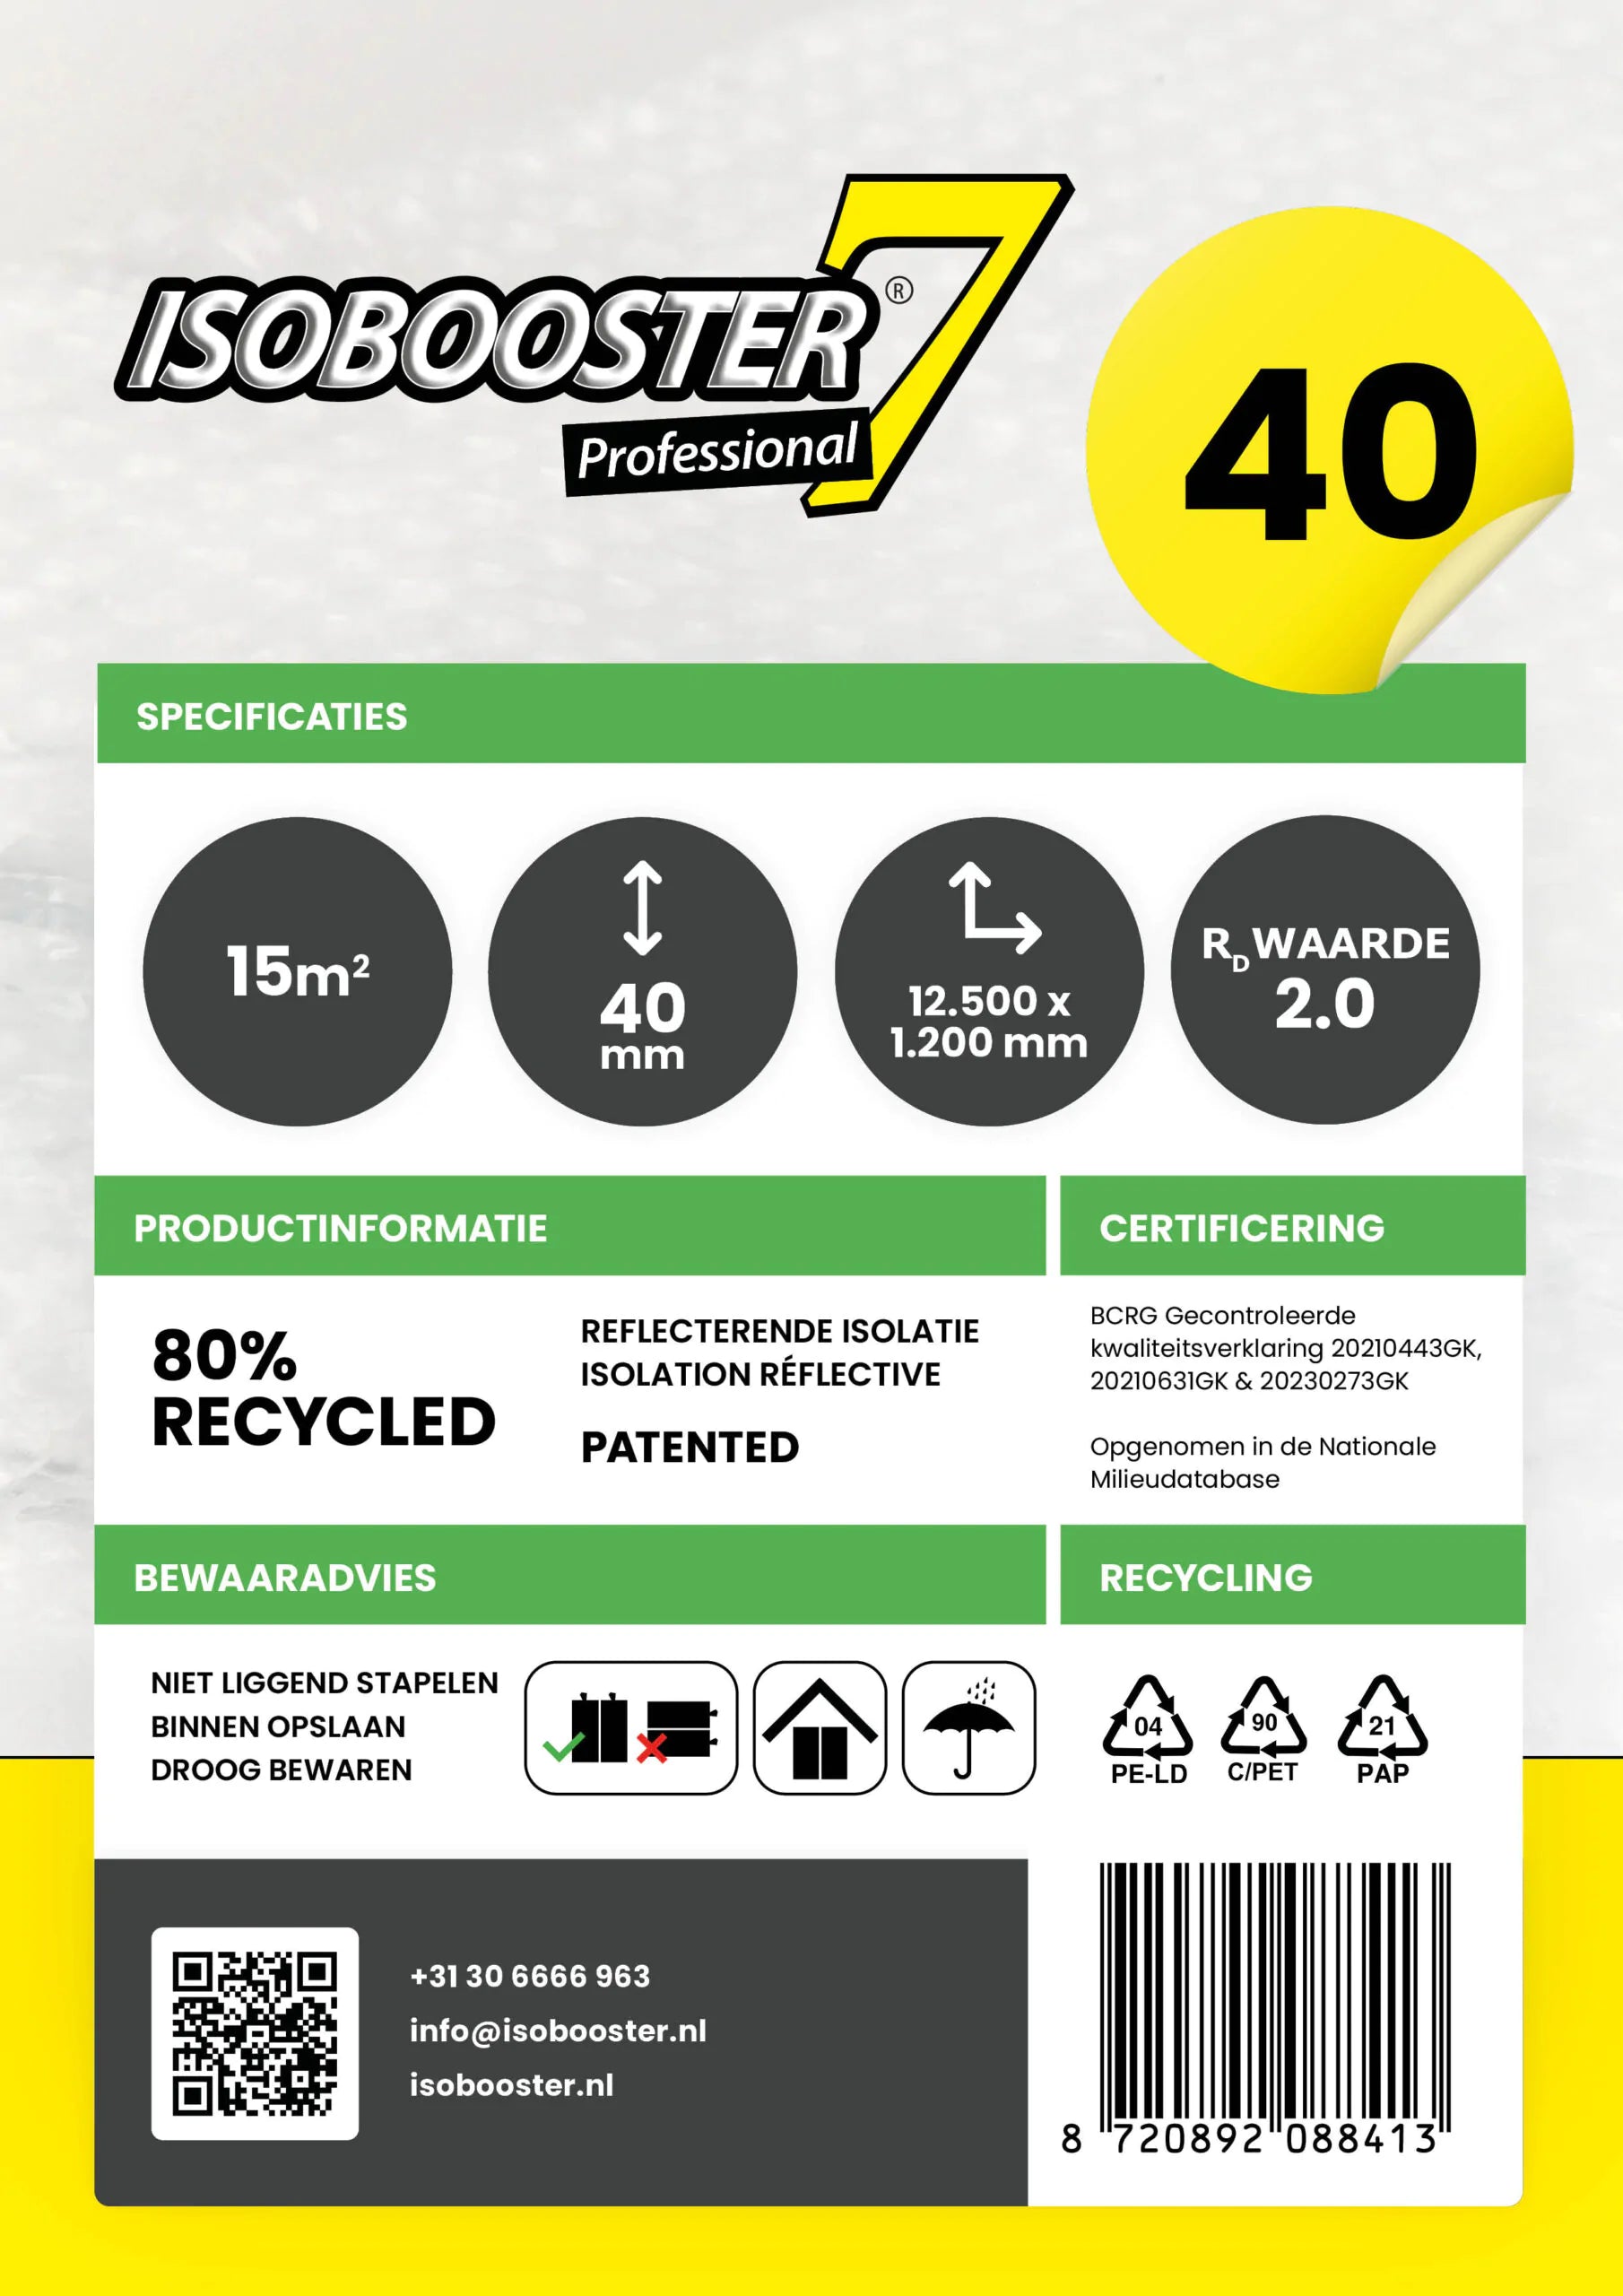 Isobooster Professionnel 40mm